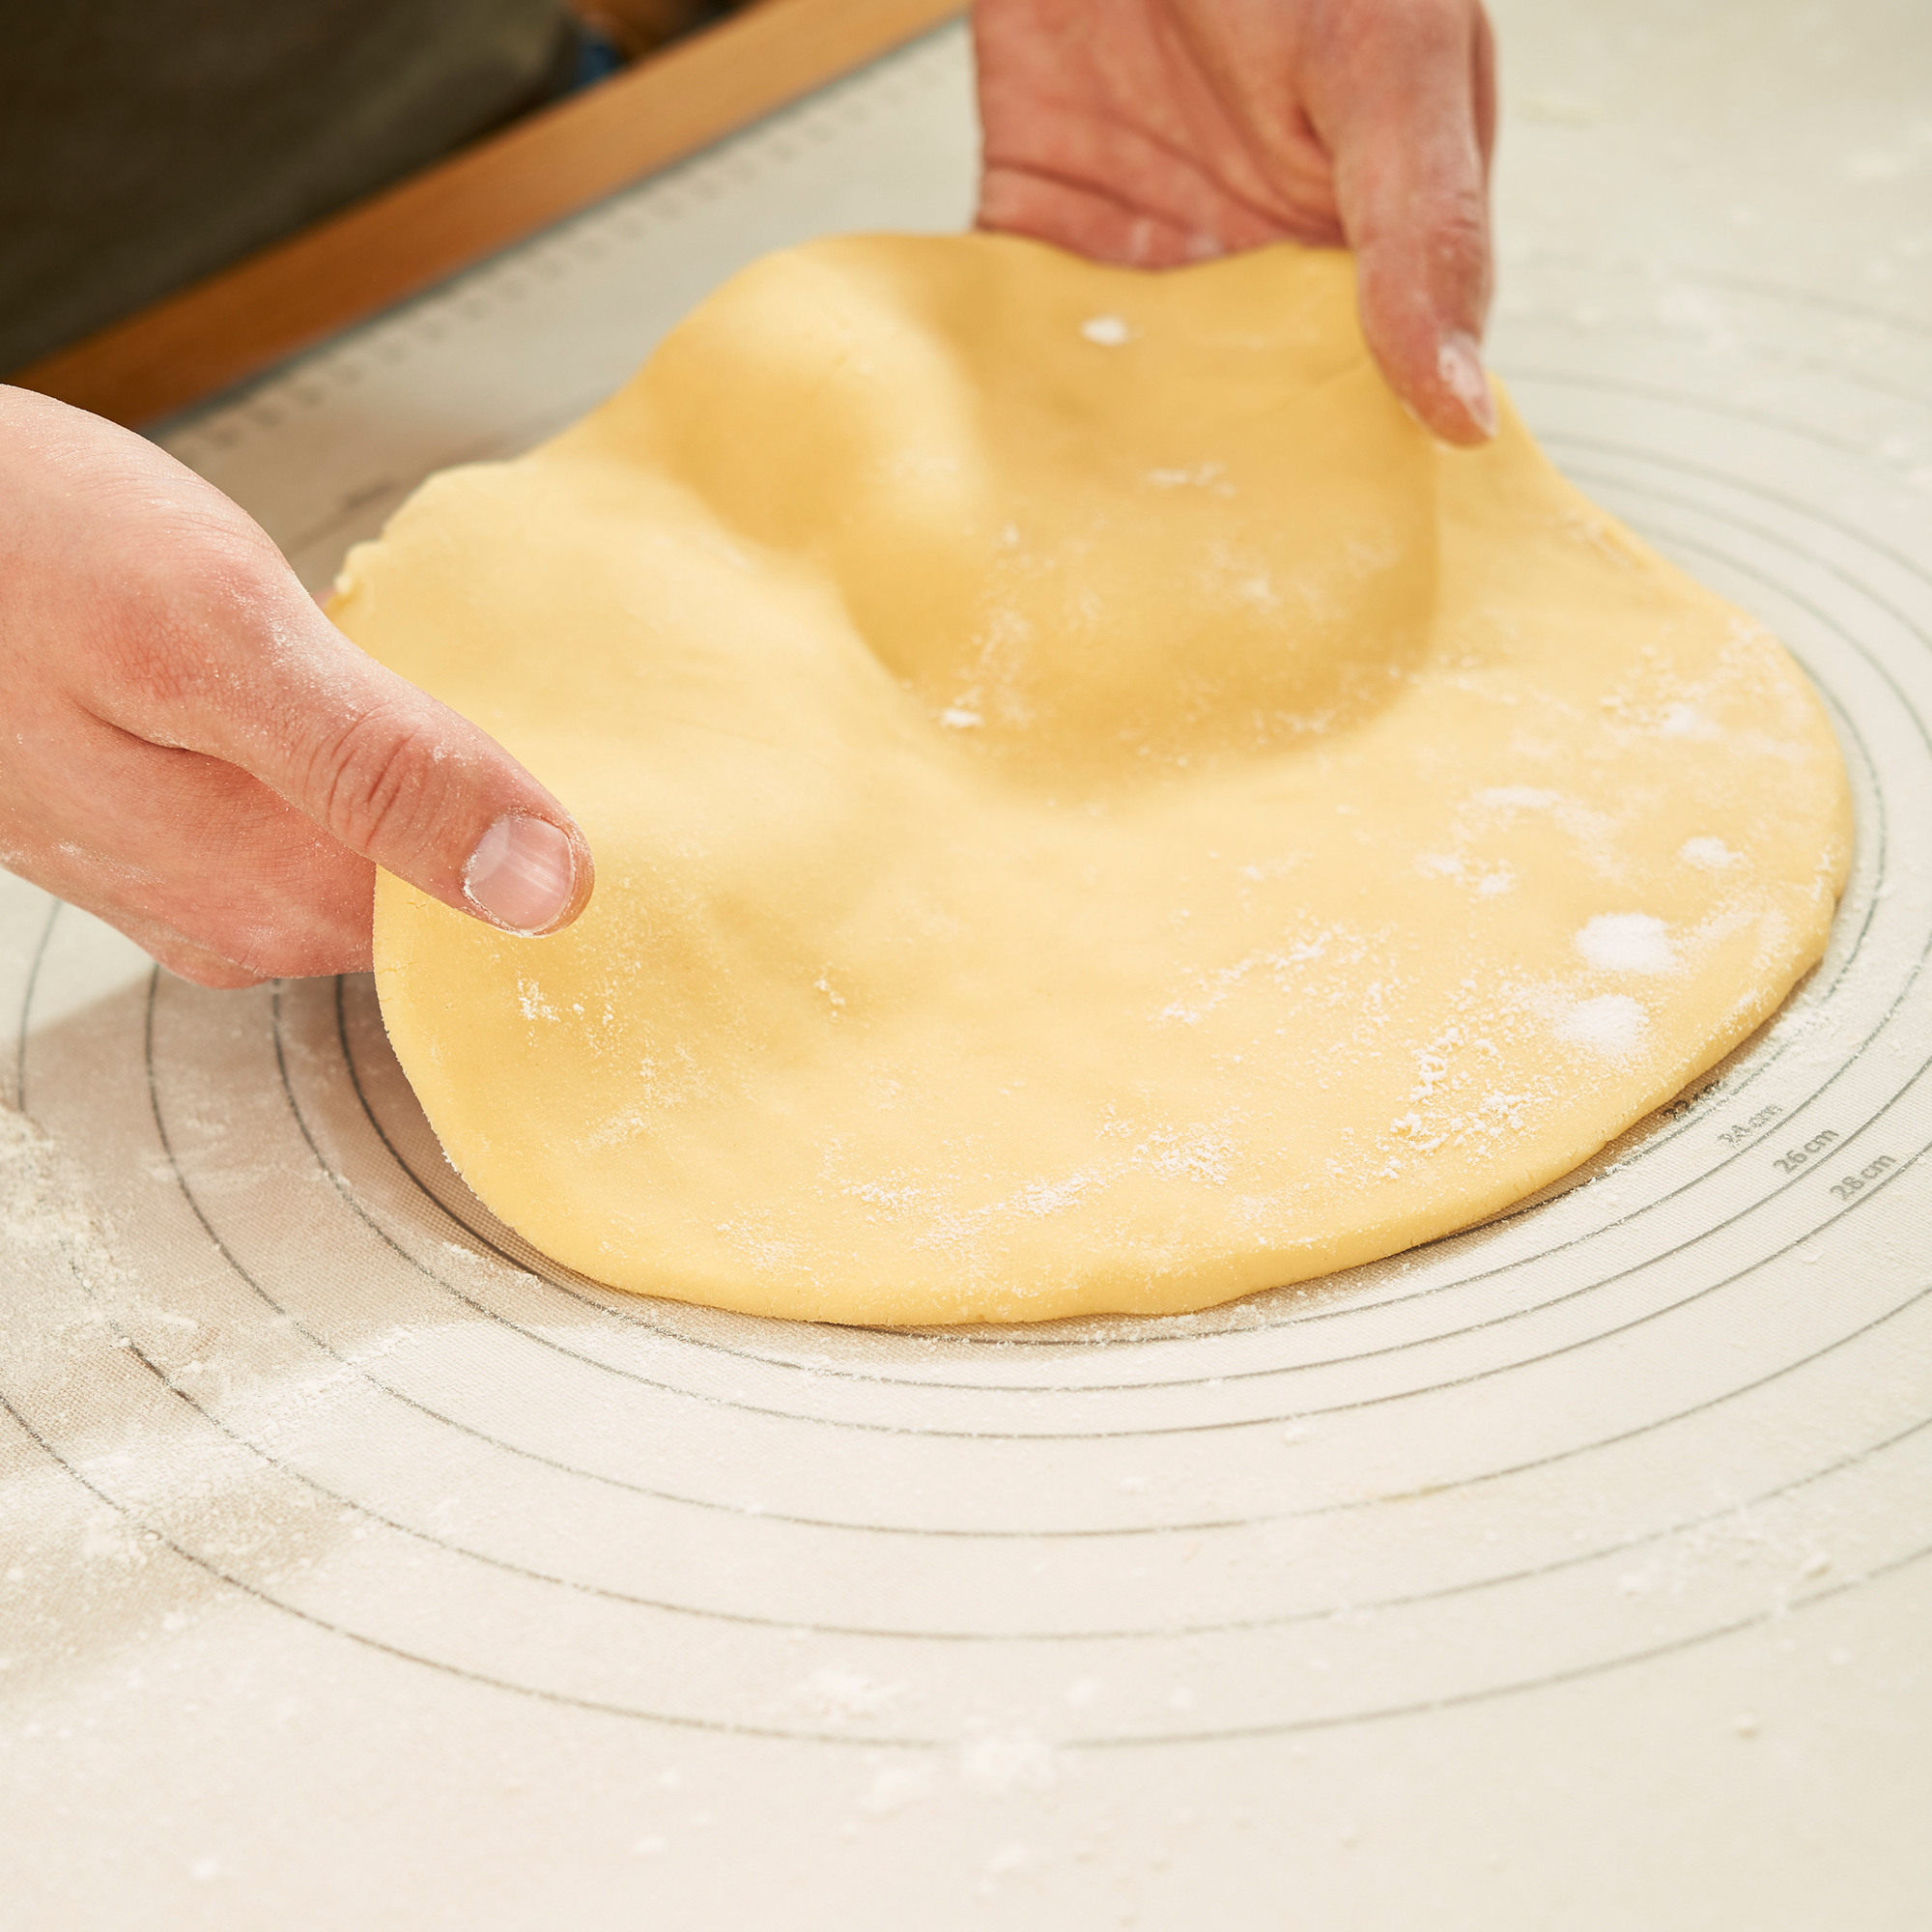 Baking and Work Mat 68 x 53 cm|26.8 x 20.9 in.